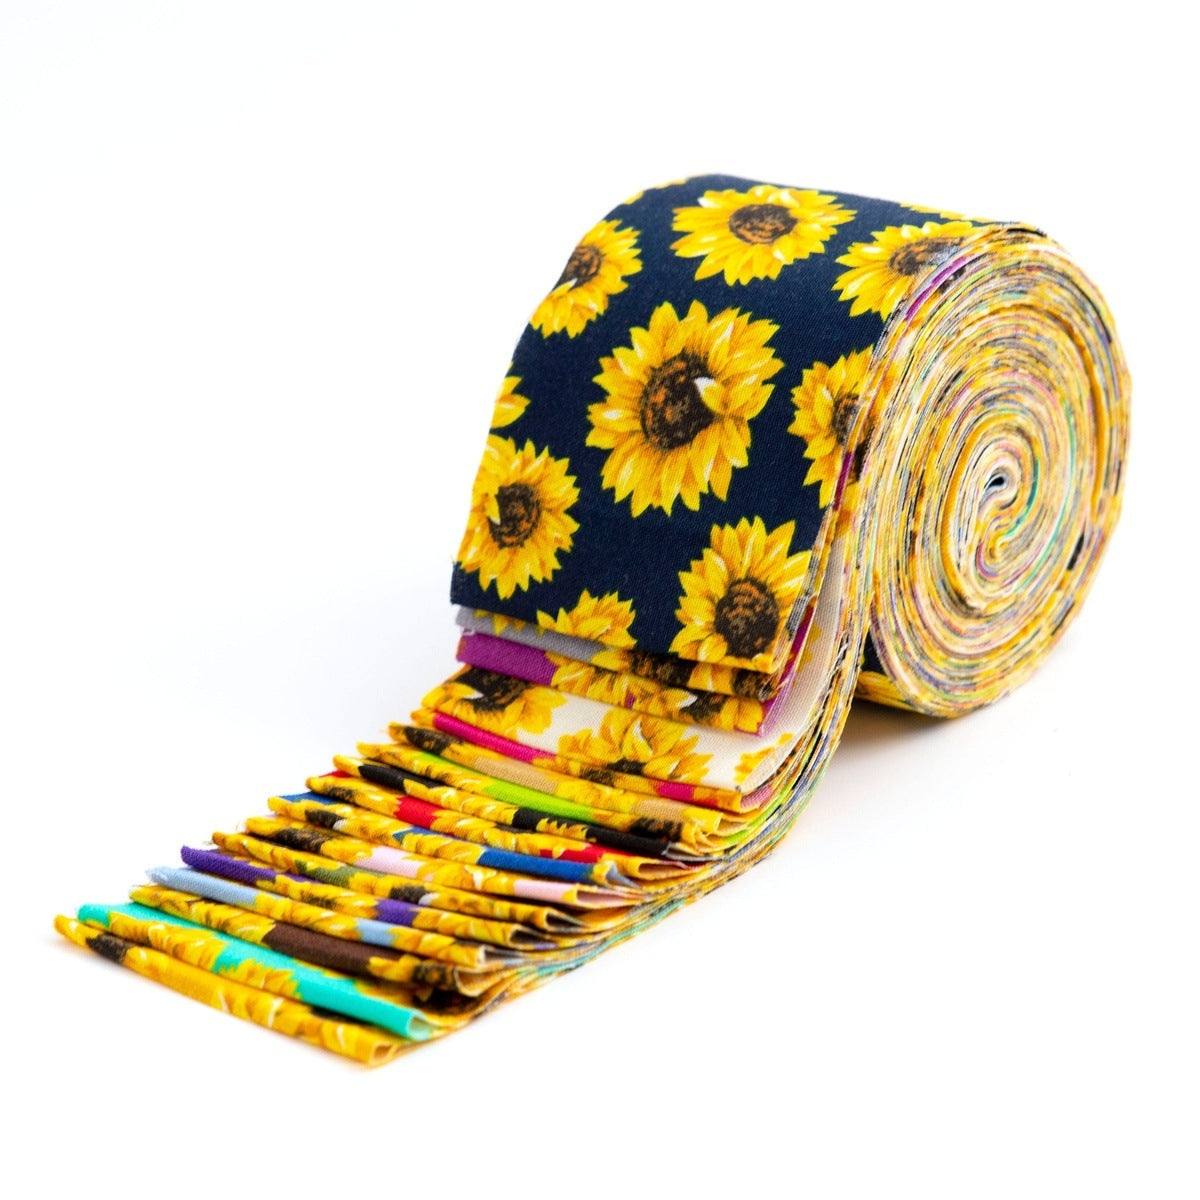 2.5 inch SUNFLOWERS Strip Roll 100% cotton fabric quilting strips 17 pieces pre cut strips